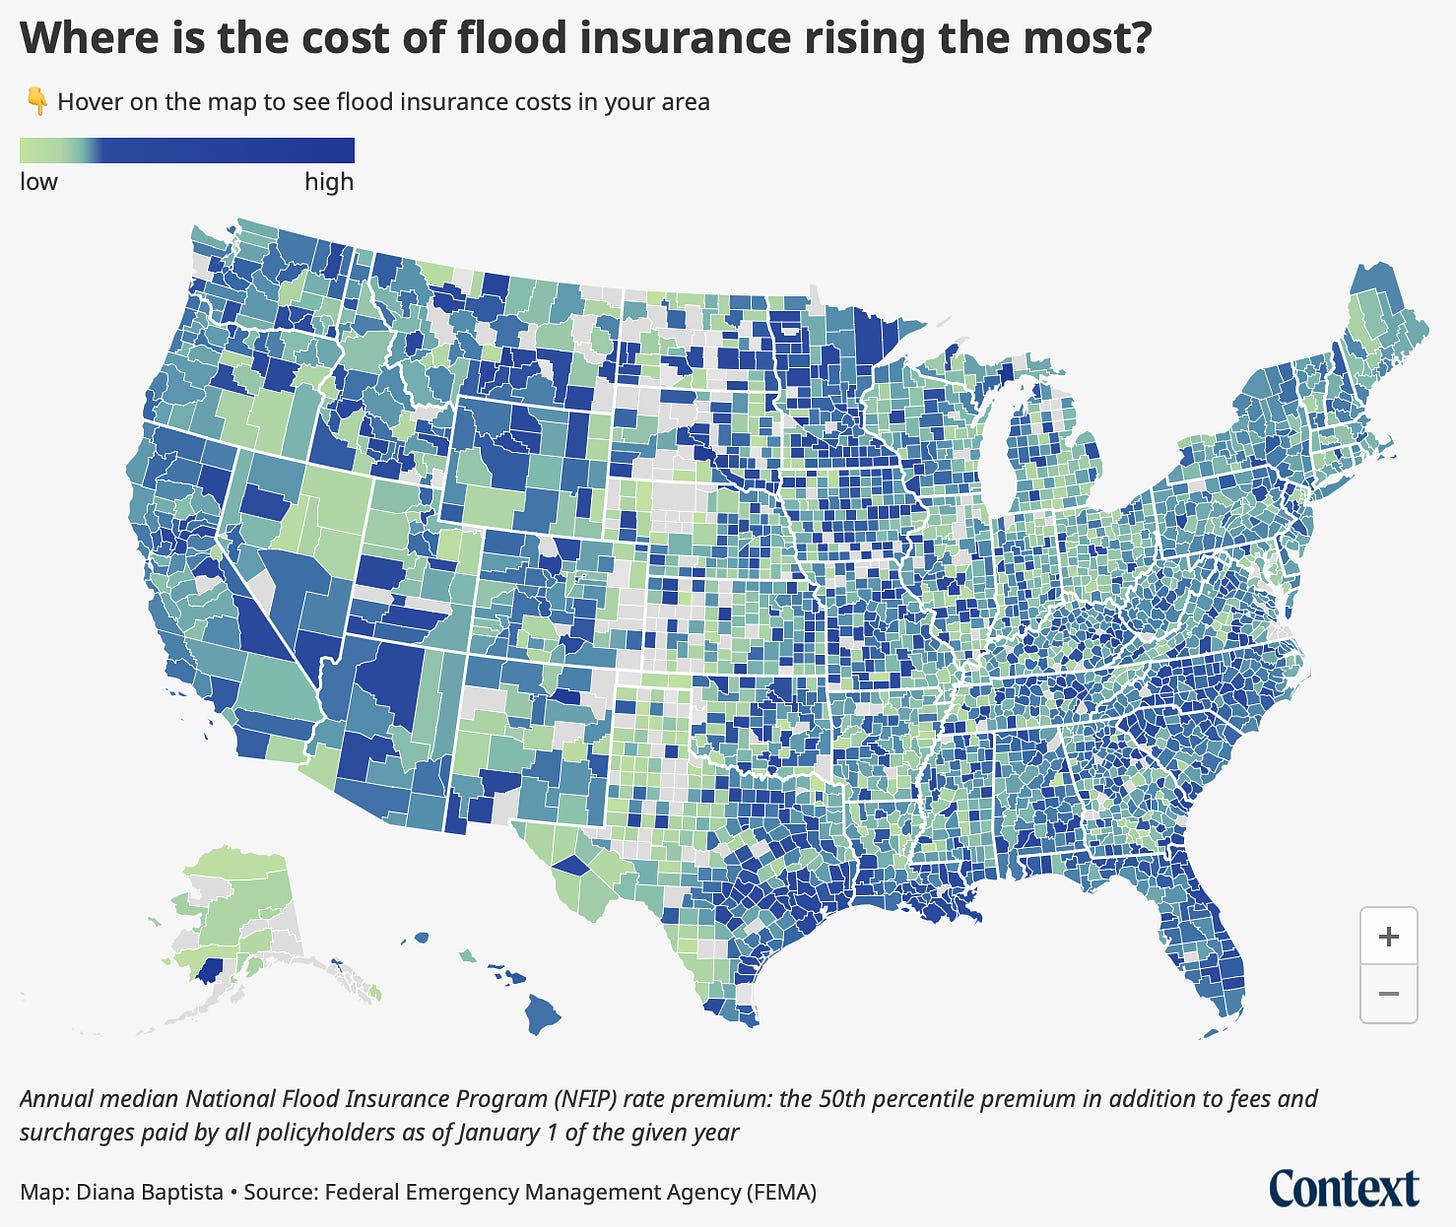 A map of the US showing where flood insurance rates are rising